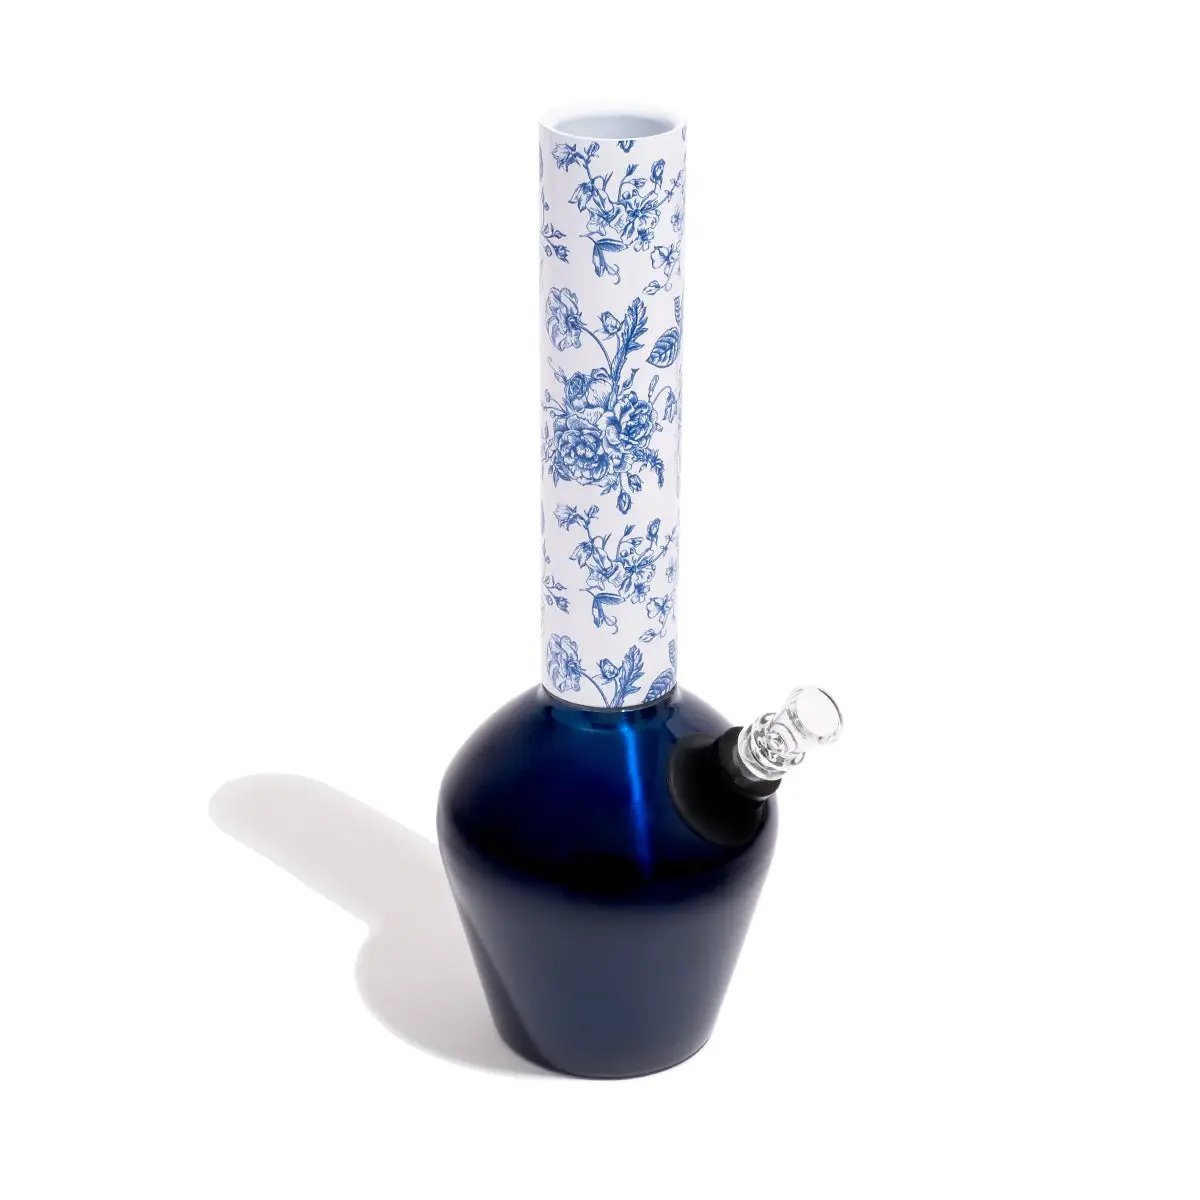 Chill - Mix & Match Series - Gloss Blue Base by Chill Steel Pipes